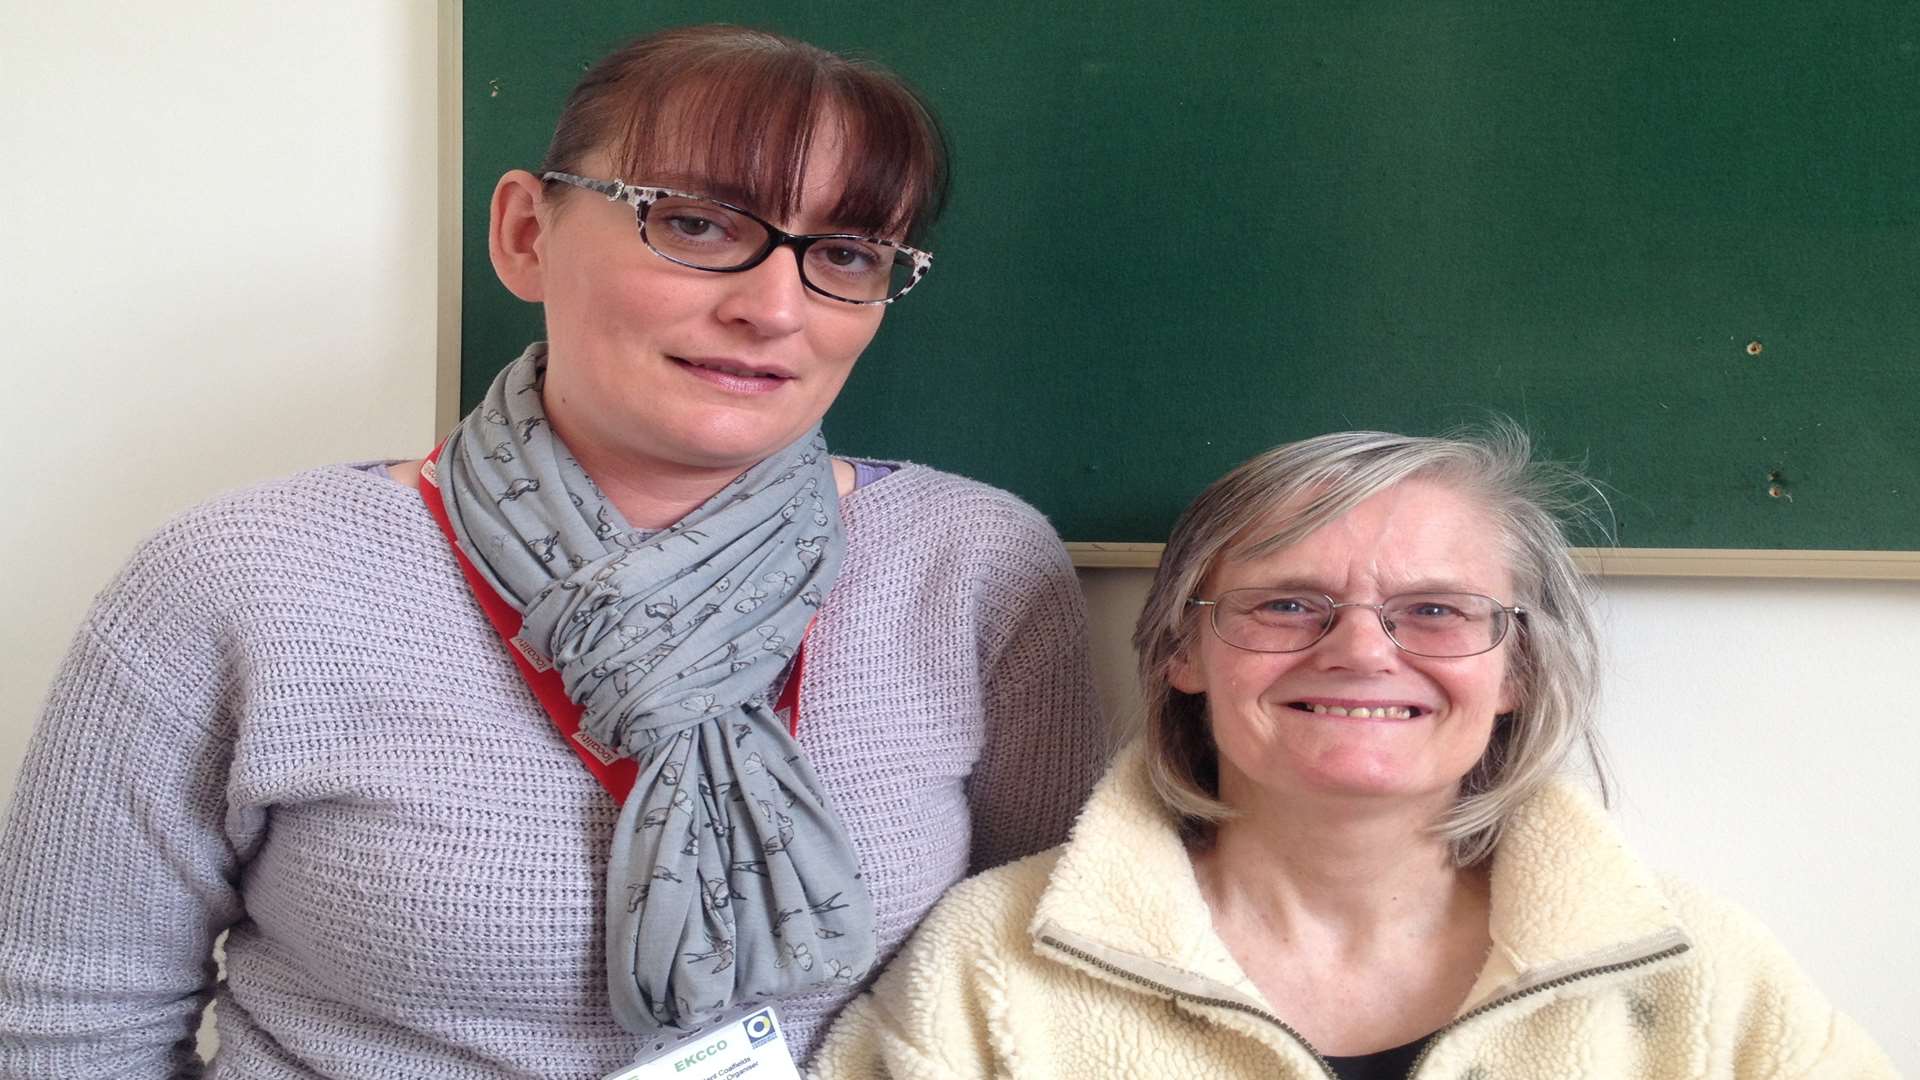 Dr Sandra Betts met Kim Chegwin who she believes helped save her twin's life